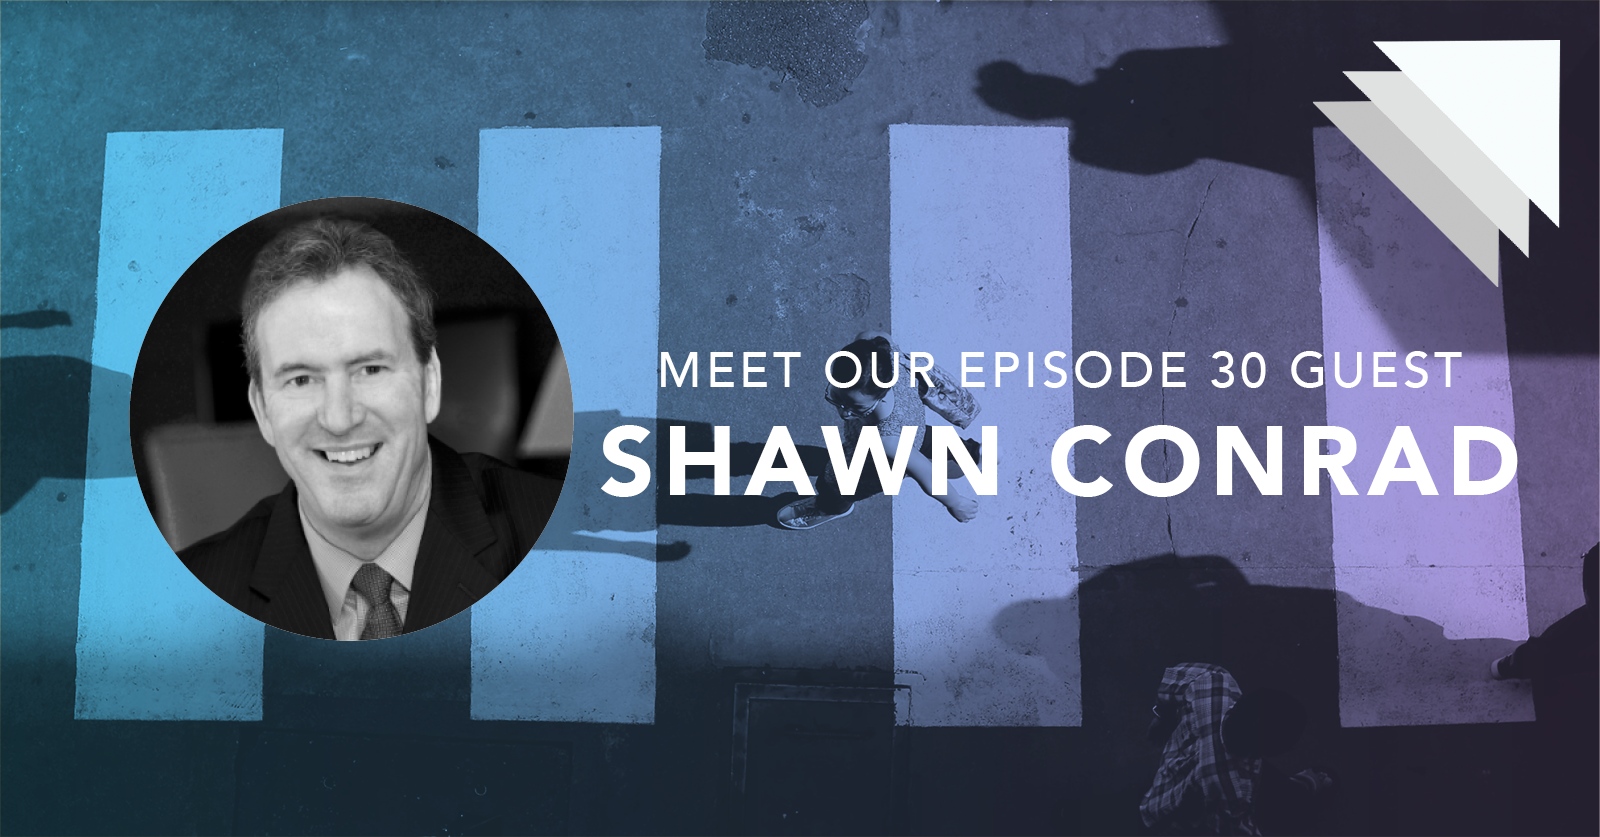 Meet our episode 30 guest Shawn Conrad